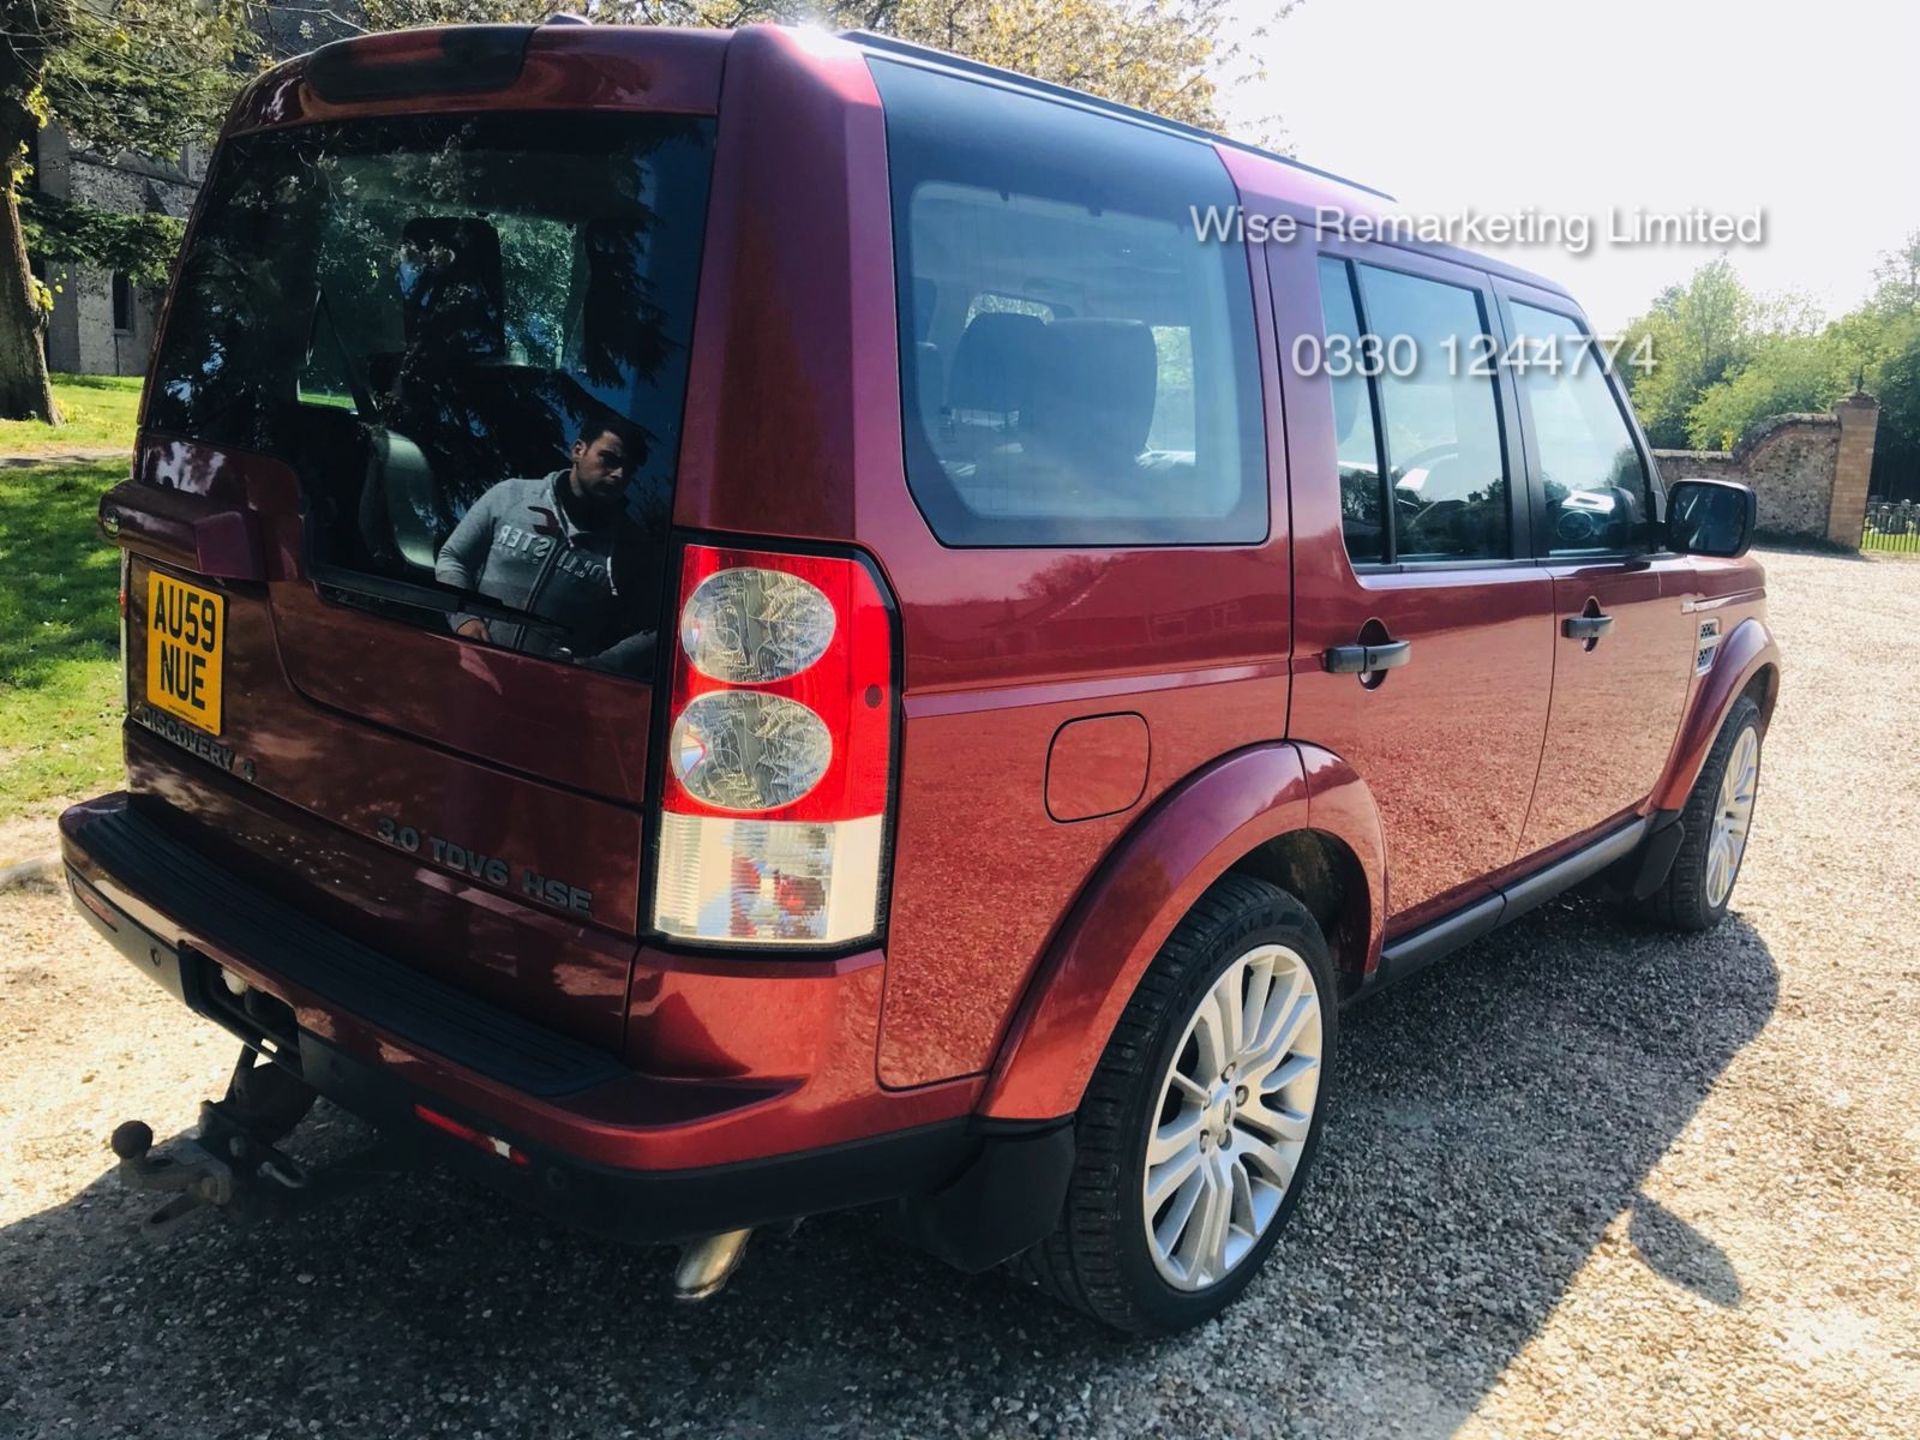 (RESERVE MET) Land Rover Discovery HSE 3.0 TDV6 Auto - 2010 Reg - Sat Nav - Sun Roofs - 7 Seats - - Image 6 of 30